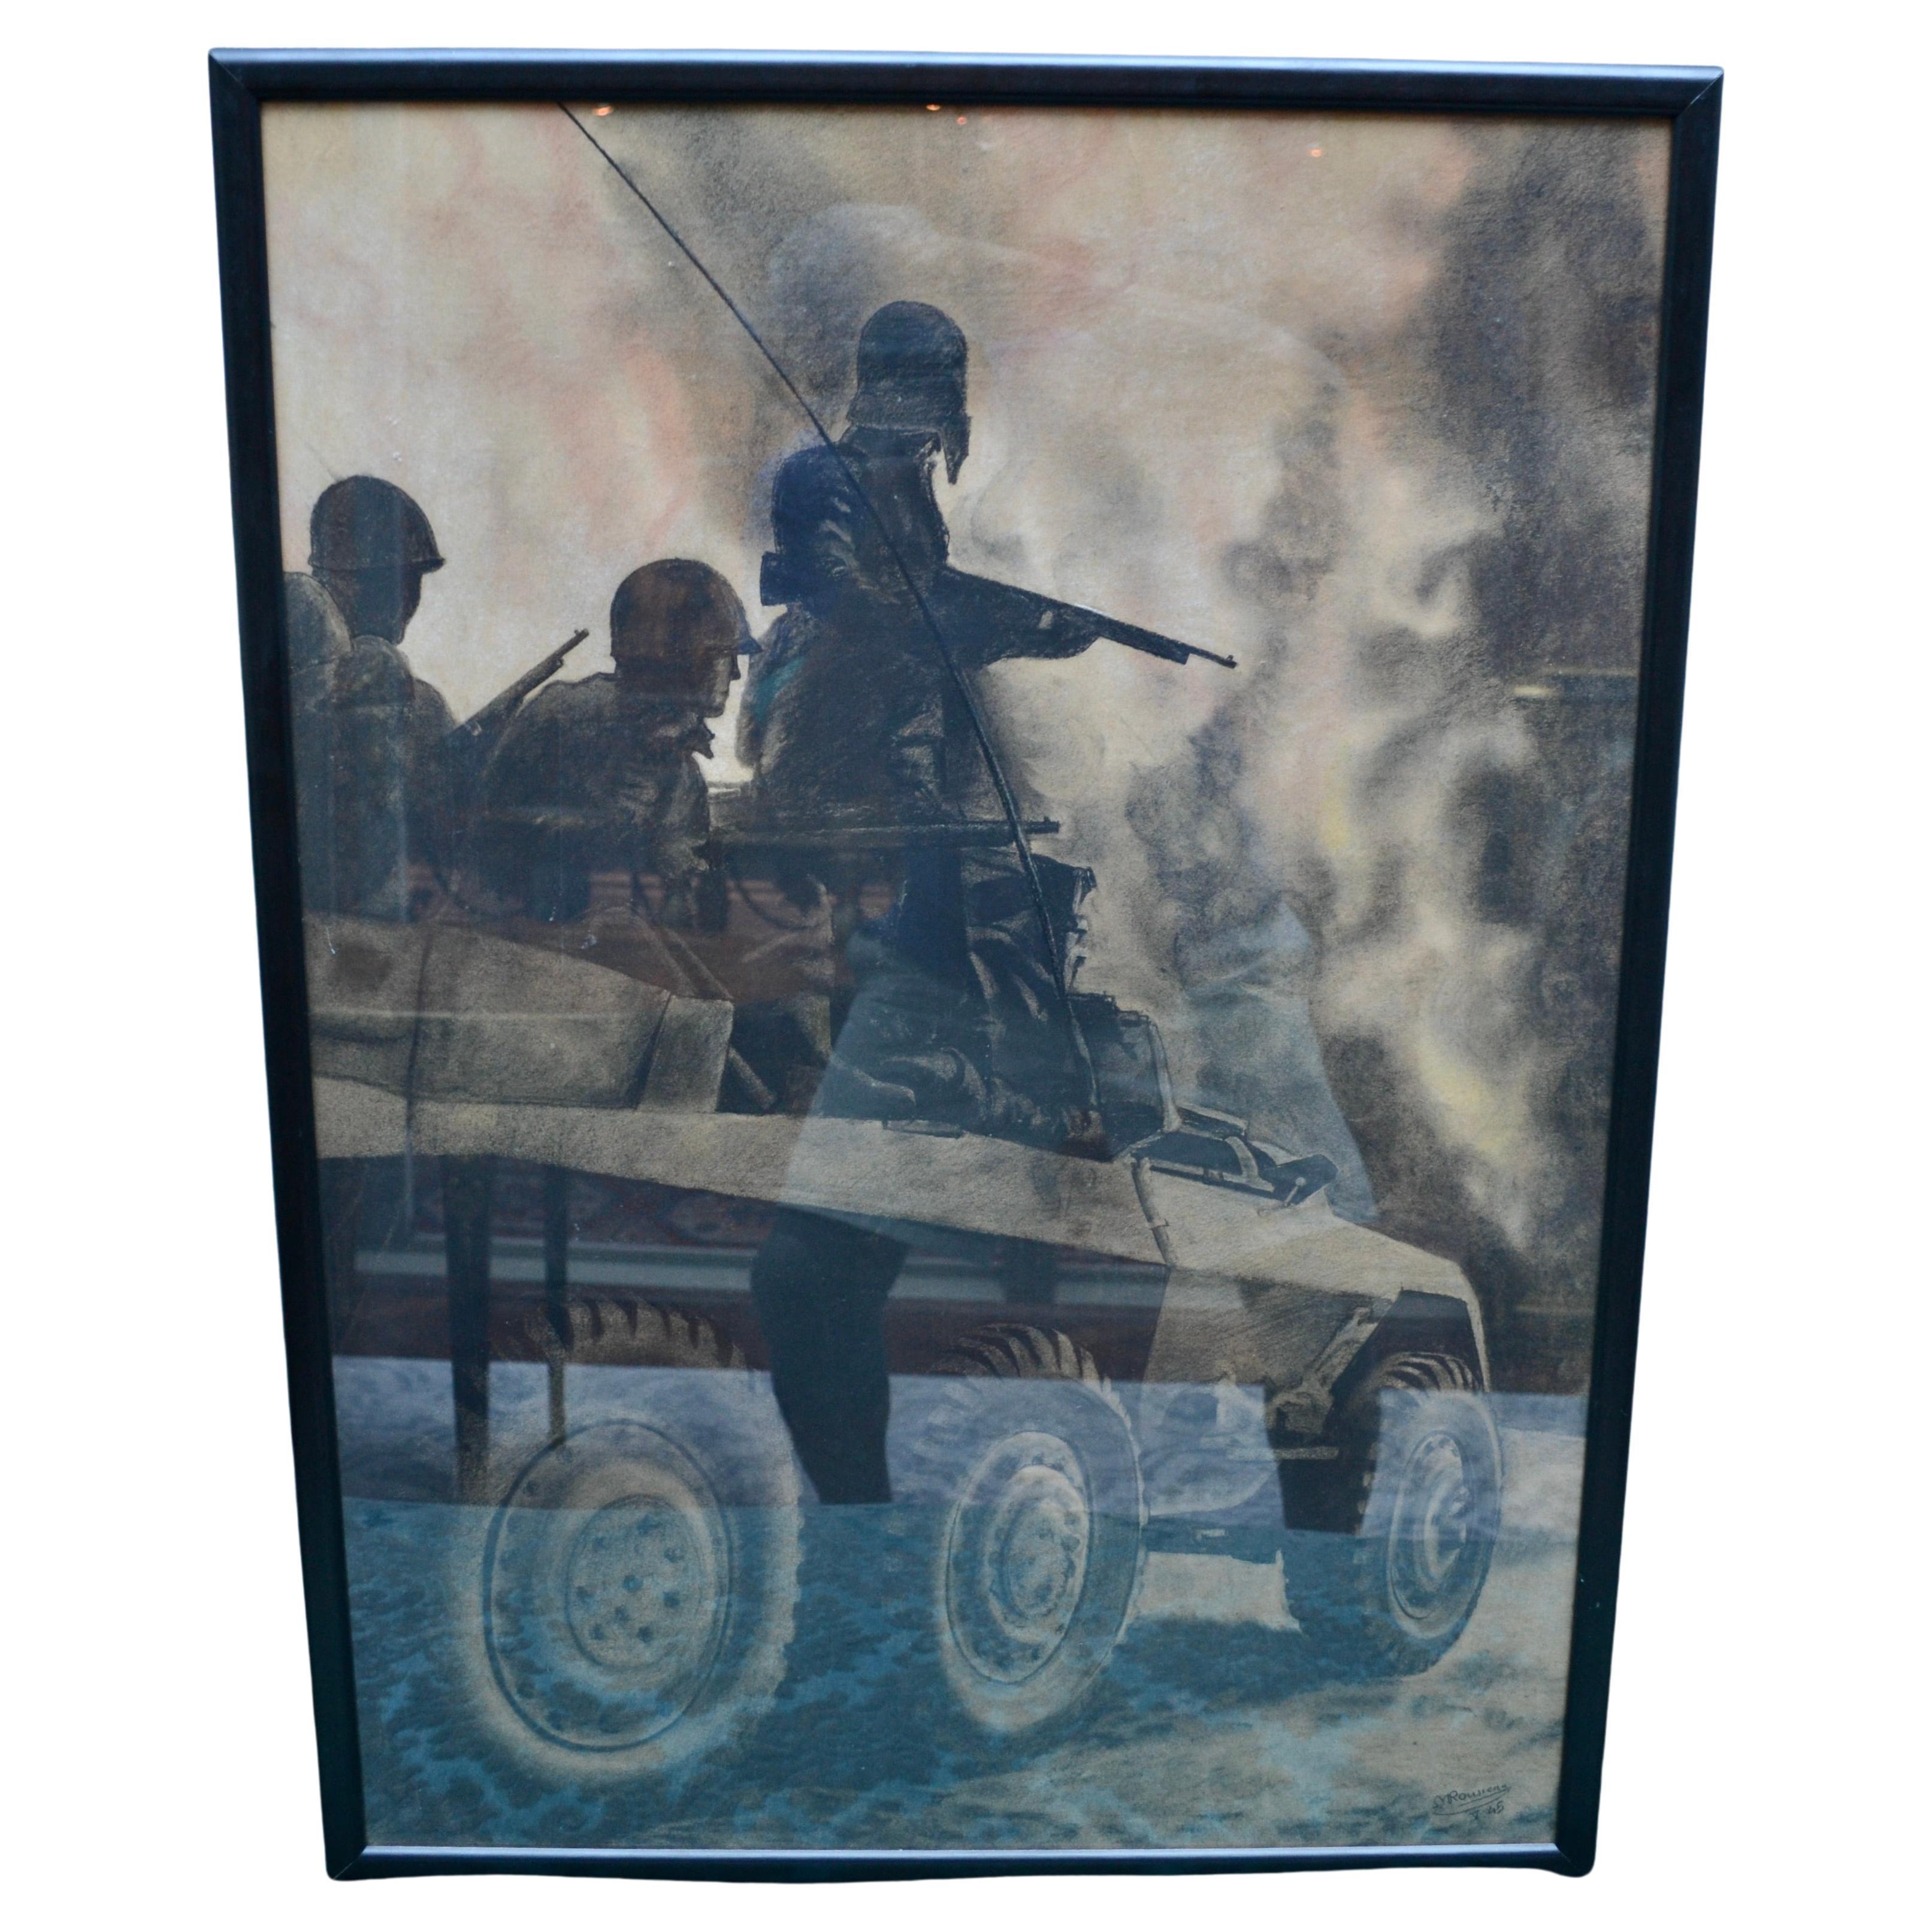   Chalk Drawing of US Army In Action  on an Armored Vehicle in Europe in WWII  For Sale